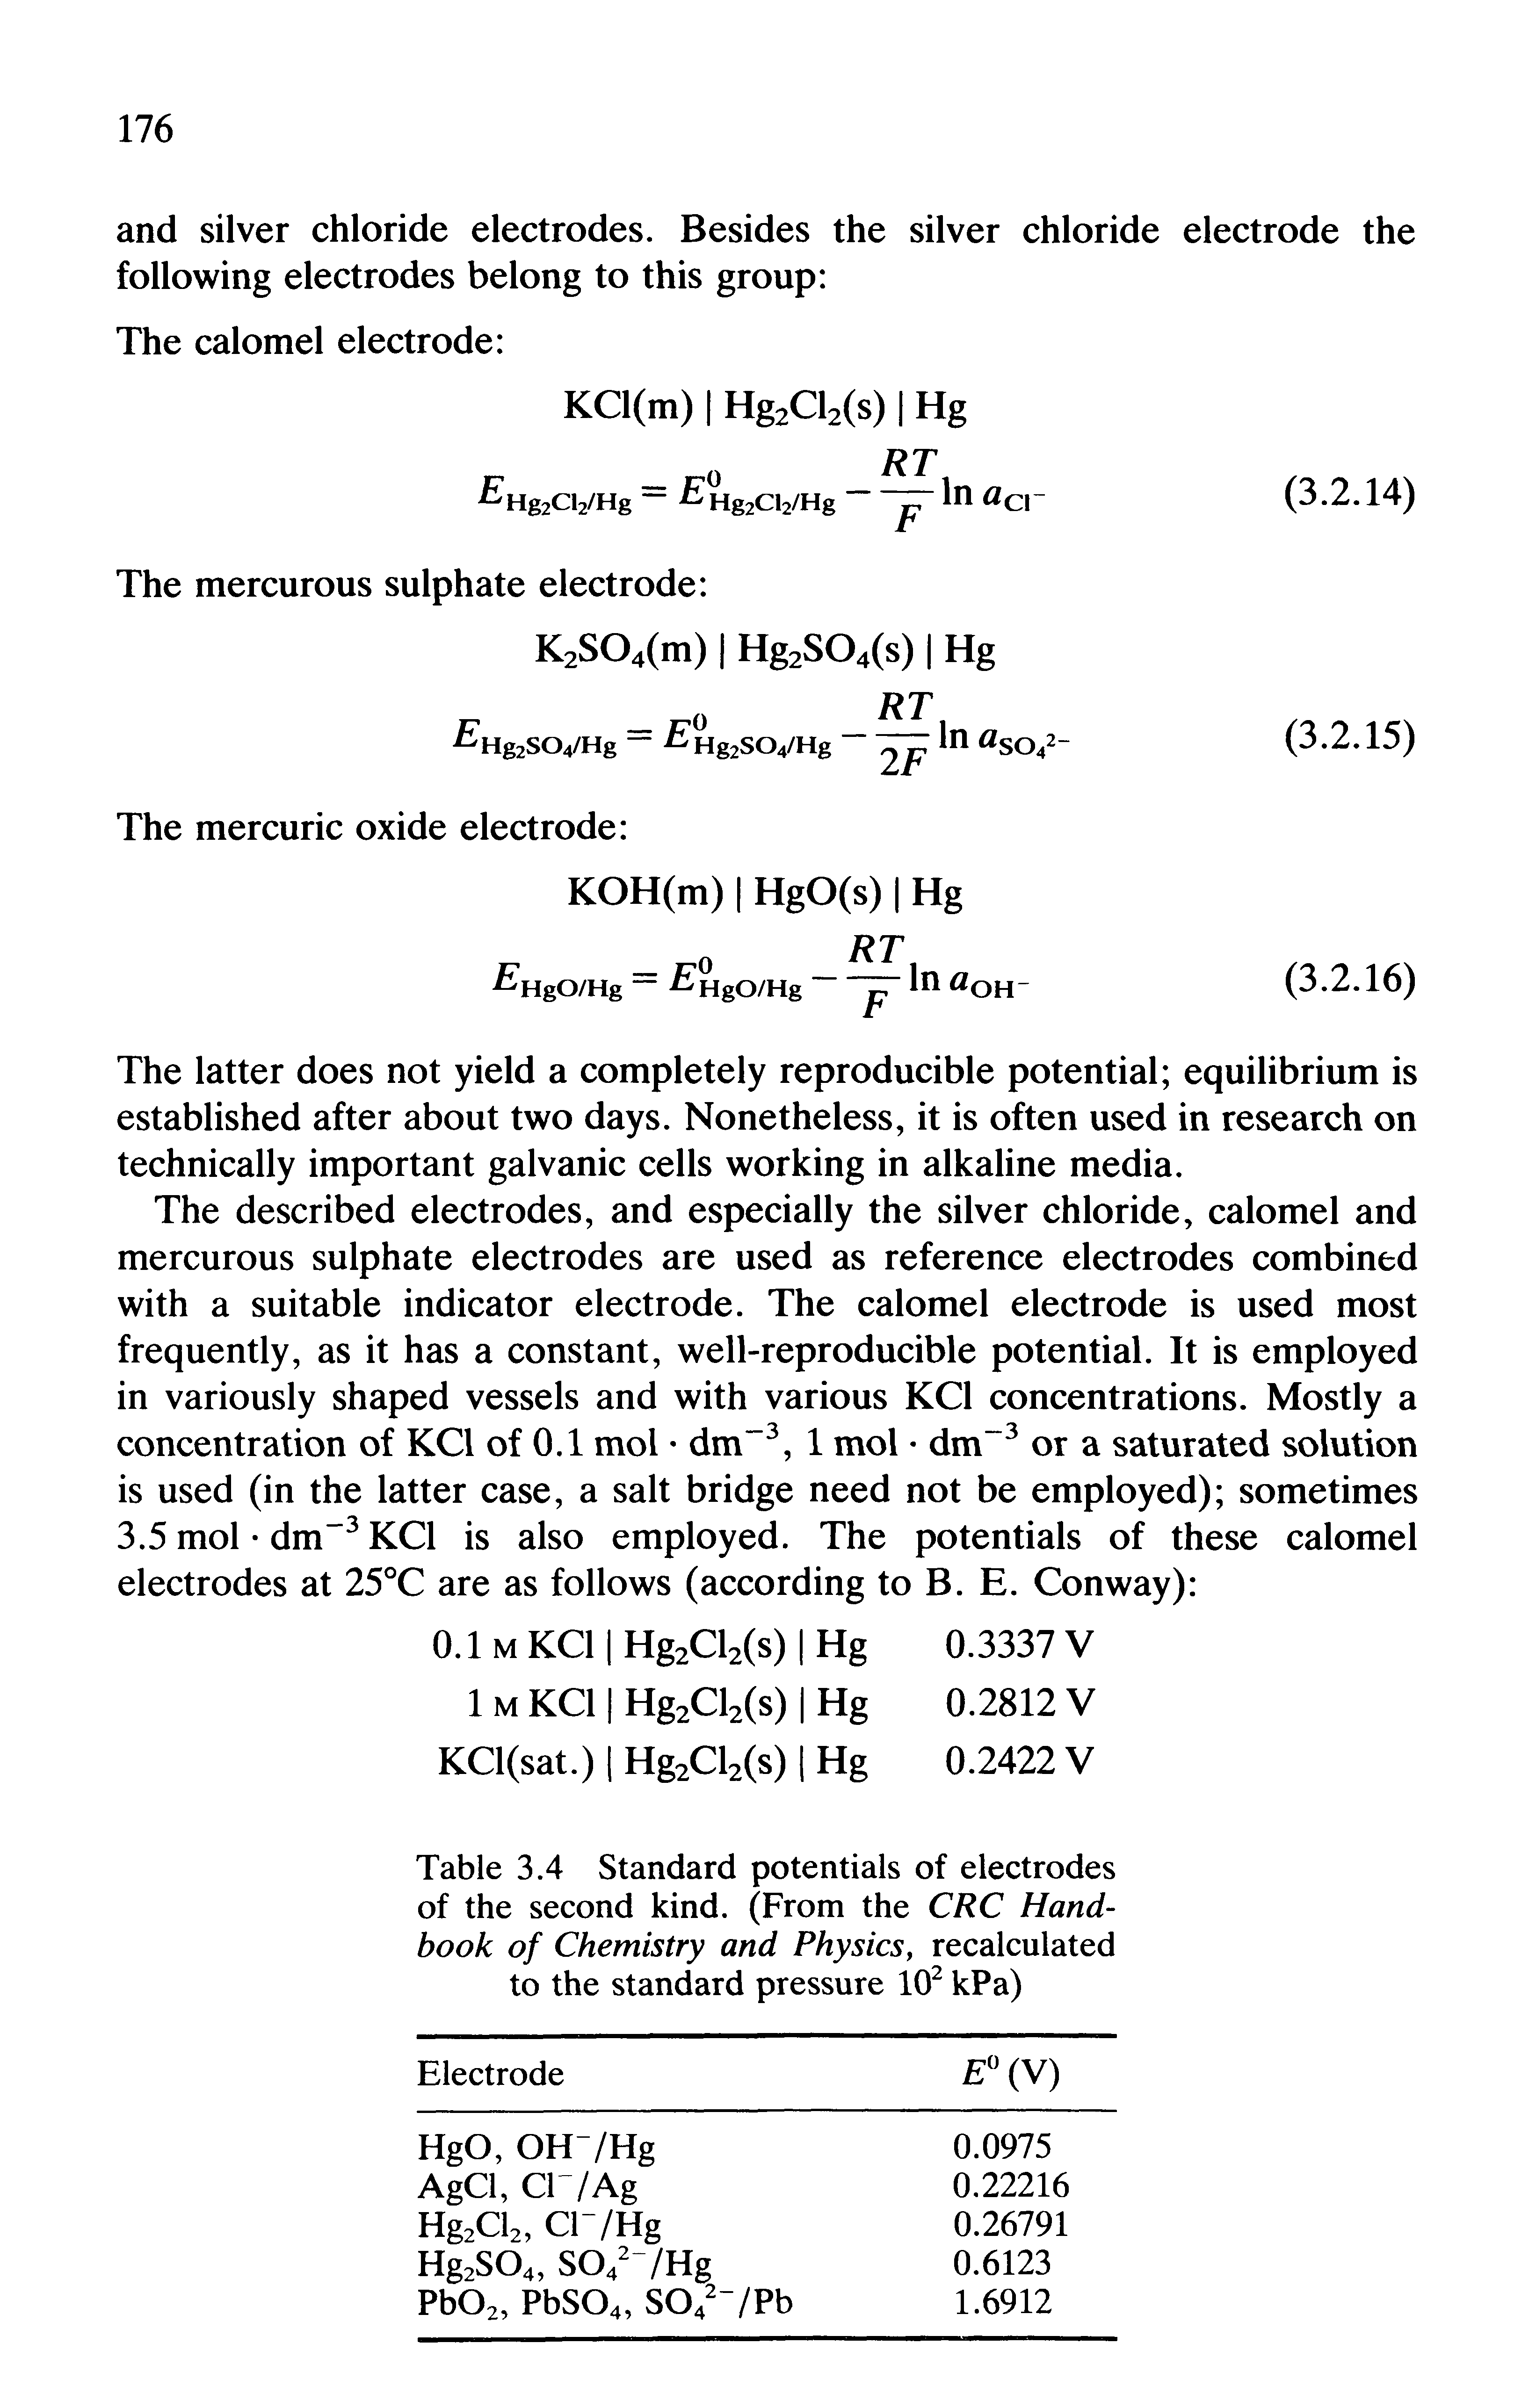 Table 3.4 Standard potentials of electrodes of the second kind. (From the CRC Handbook of Chemistry and Physics, recalculated to the standard pressure 102 kPa)...